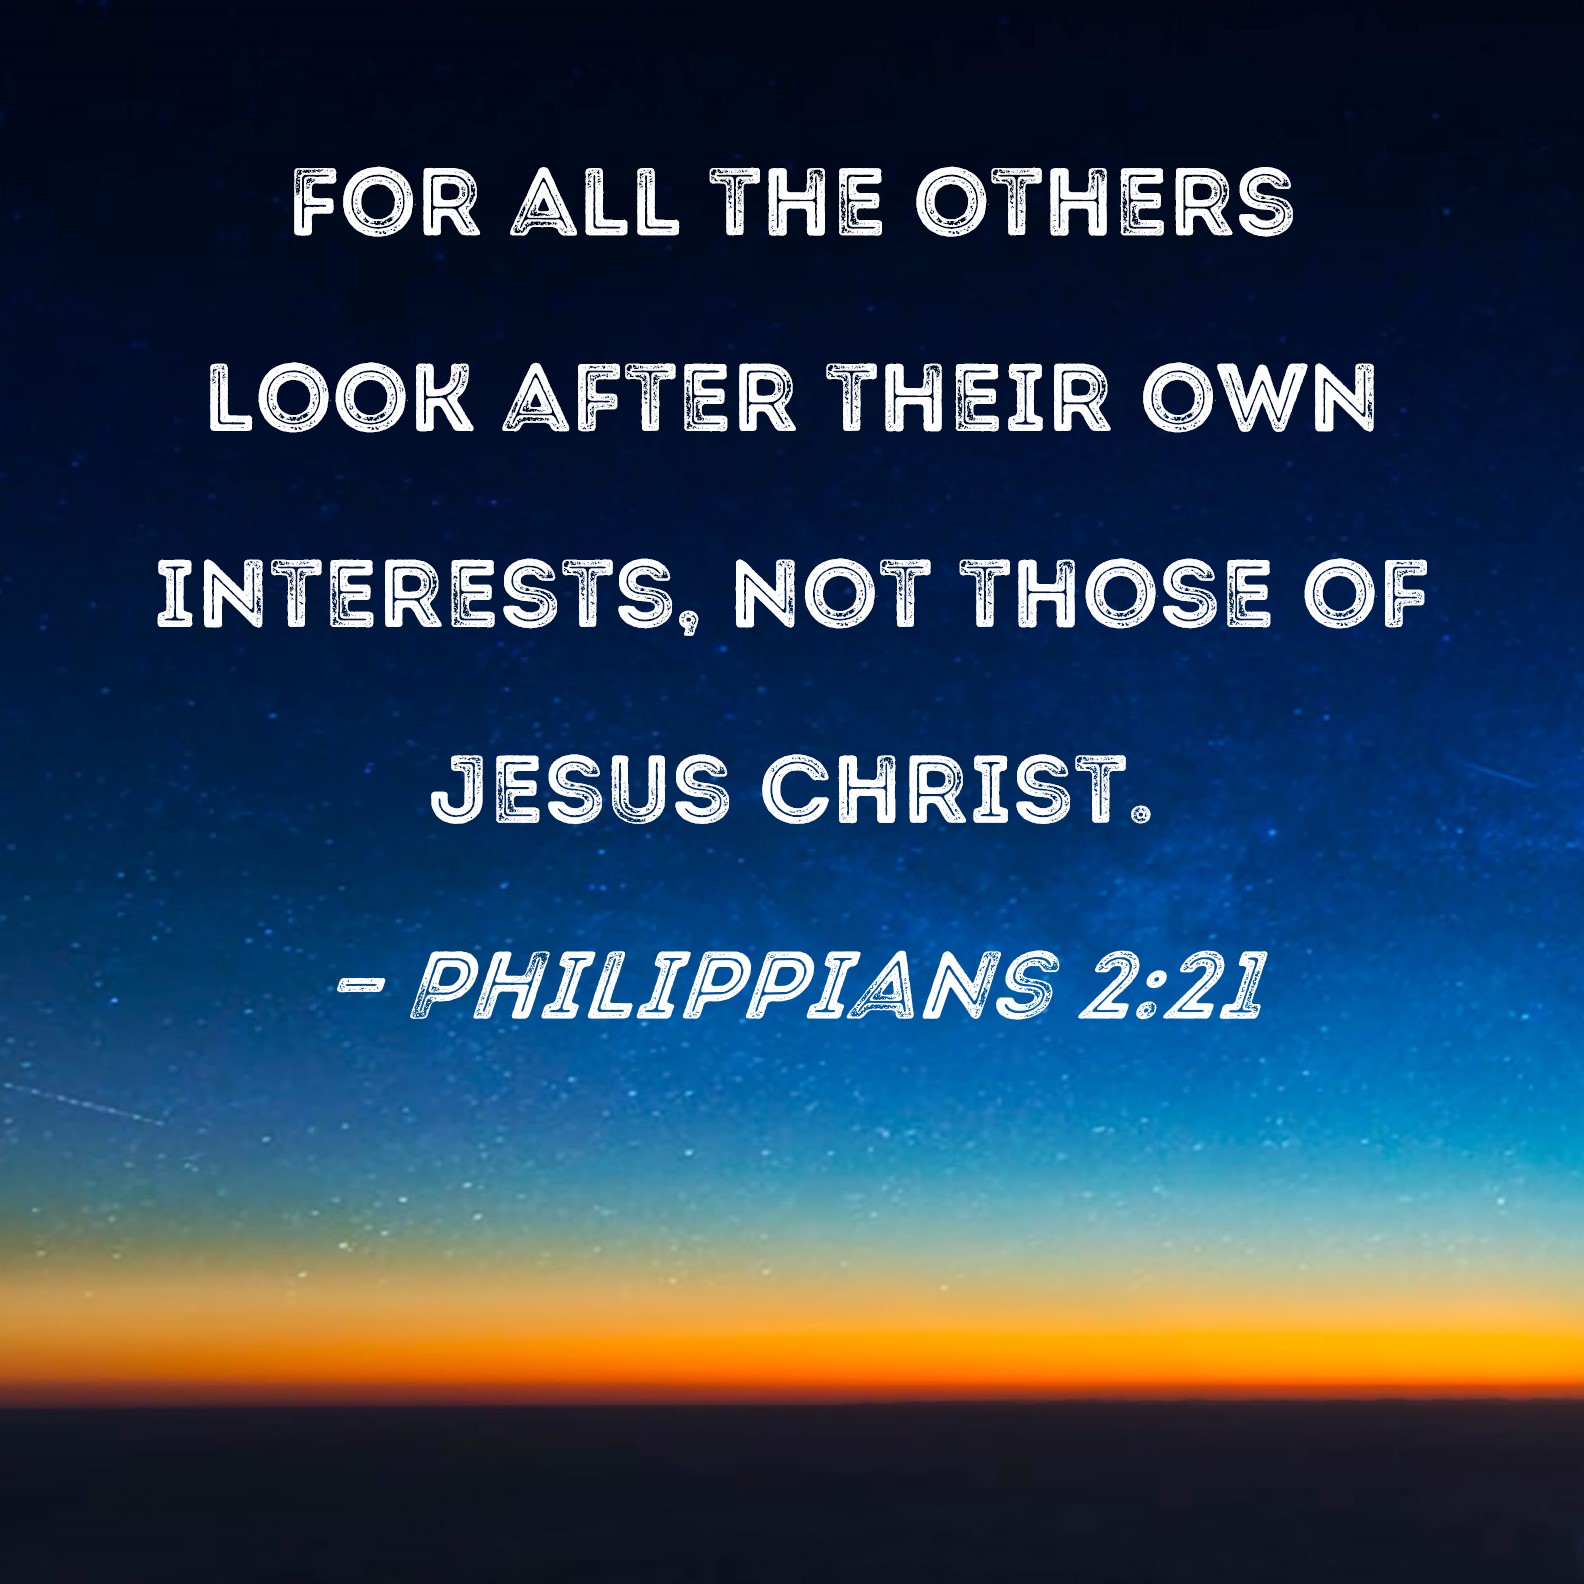 Philippians 2:21 For all the others look after their own interests